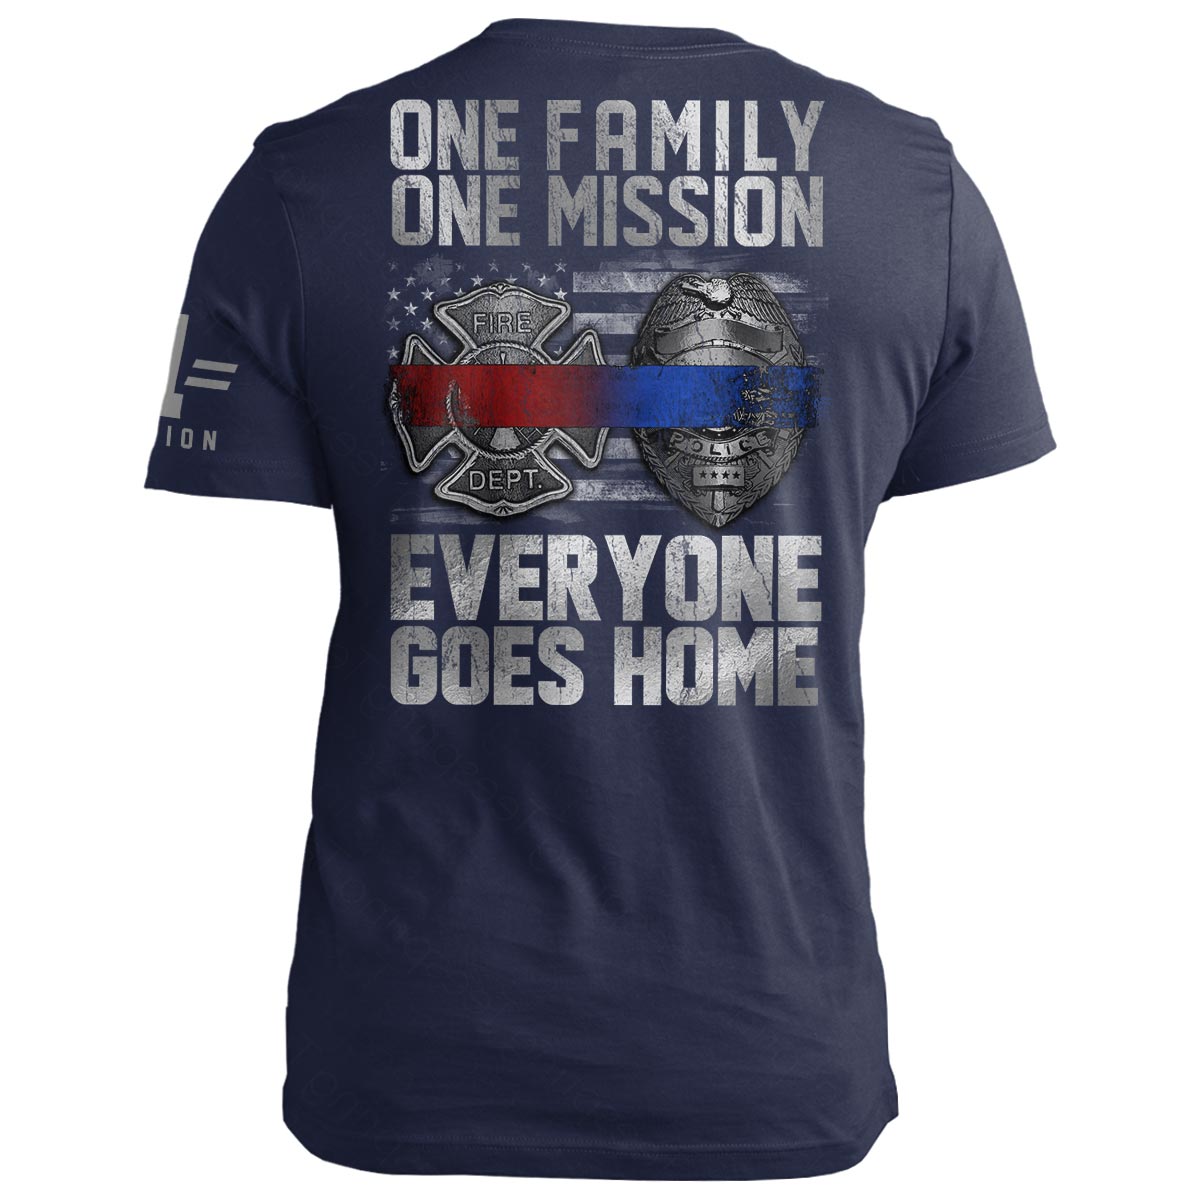 One Family, One Mission